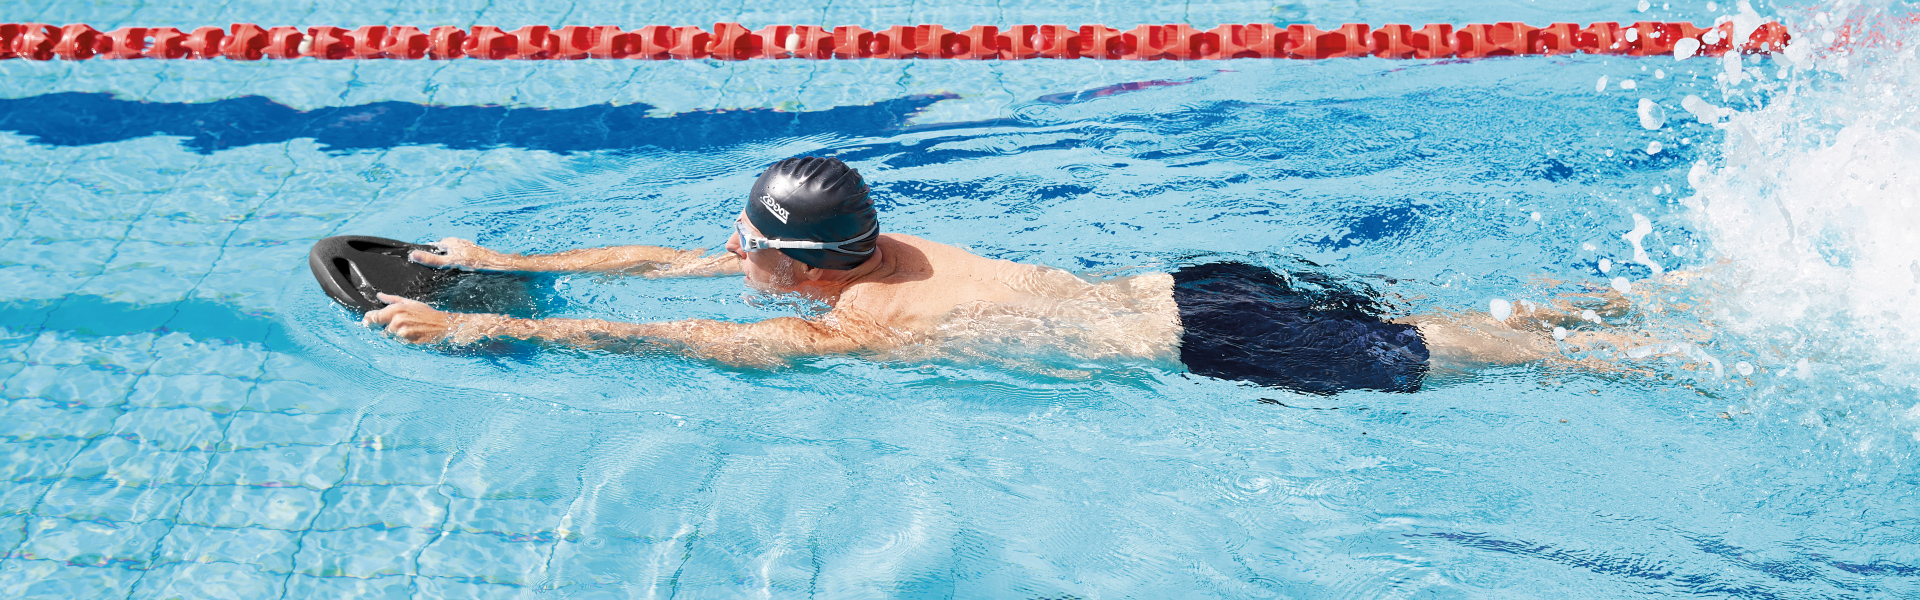 5 Tips to Help Improve Your Swimming Technique